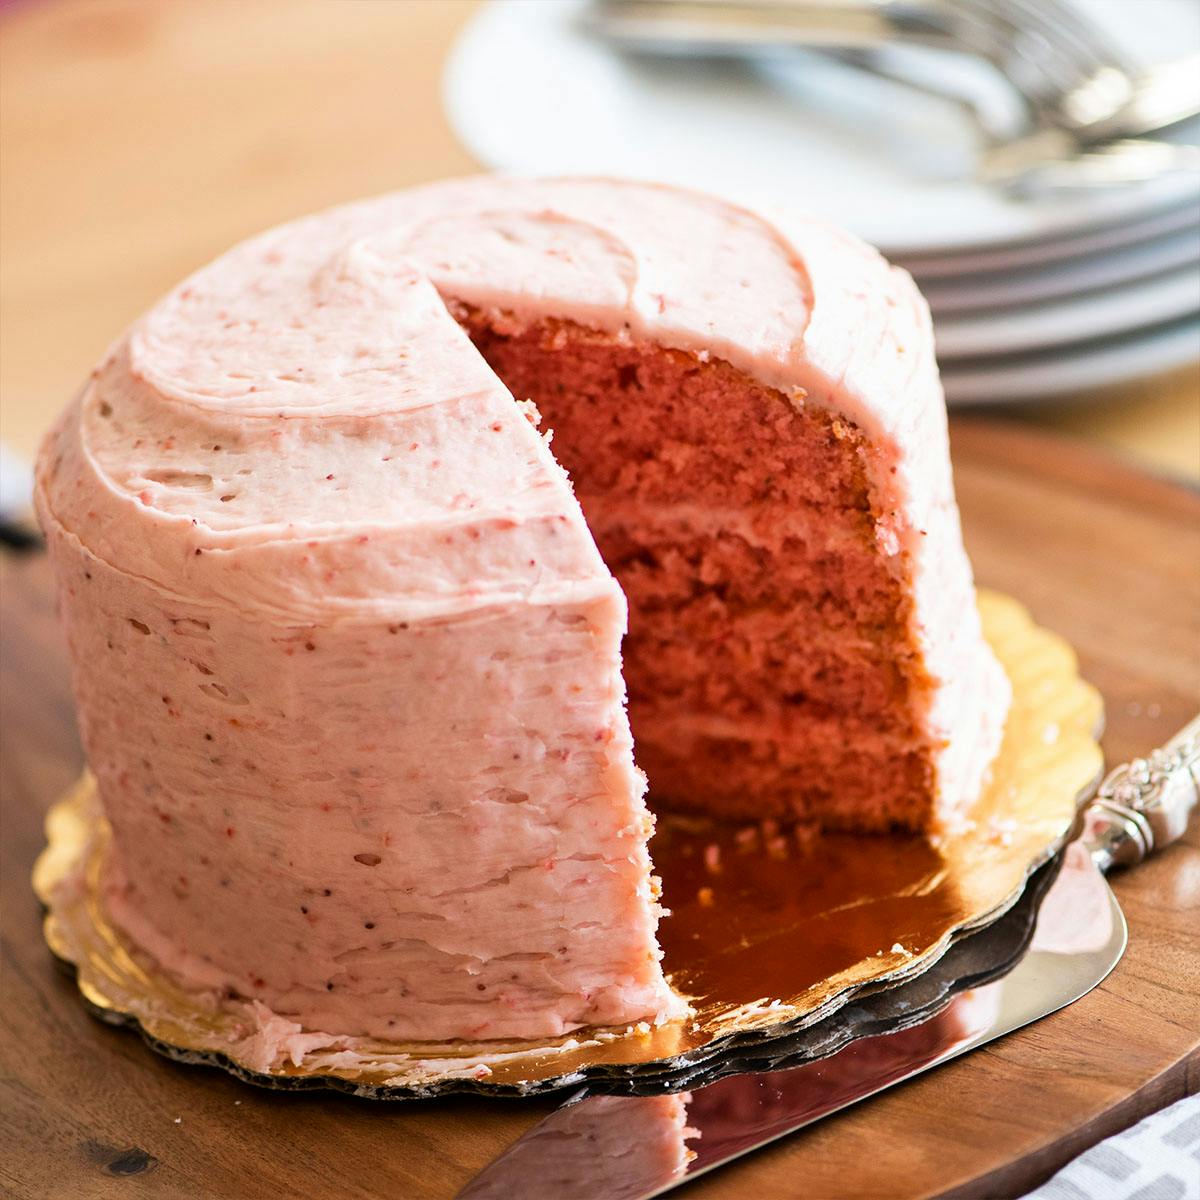 Strawberry Cake Delivery | Ship Nationwide | Goldbelly